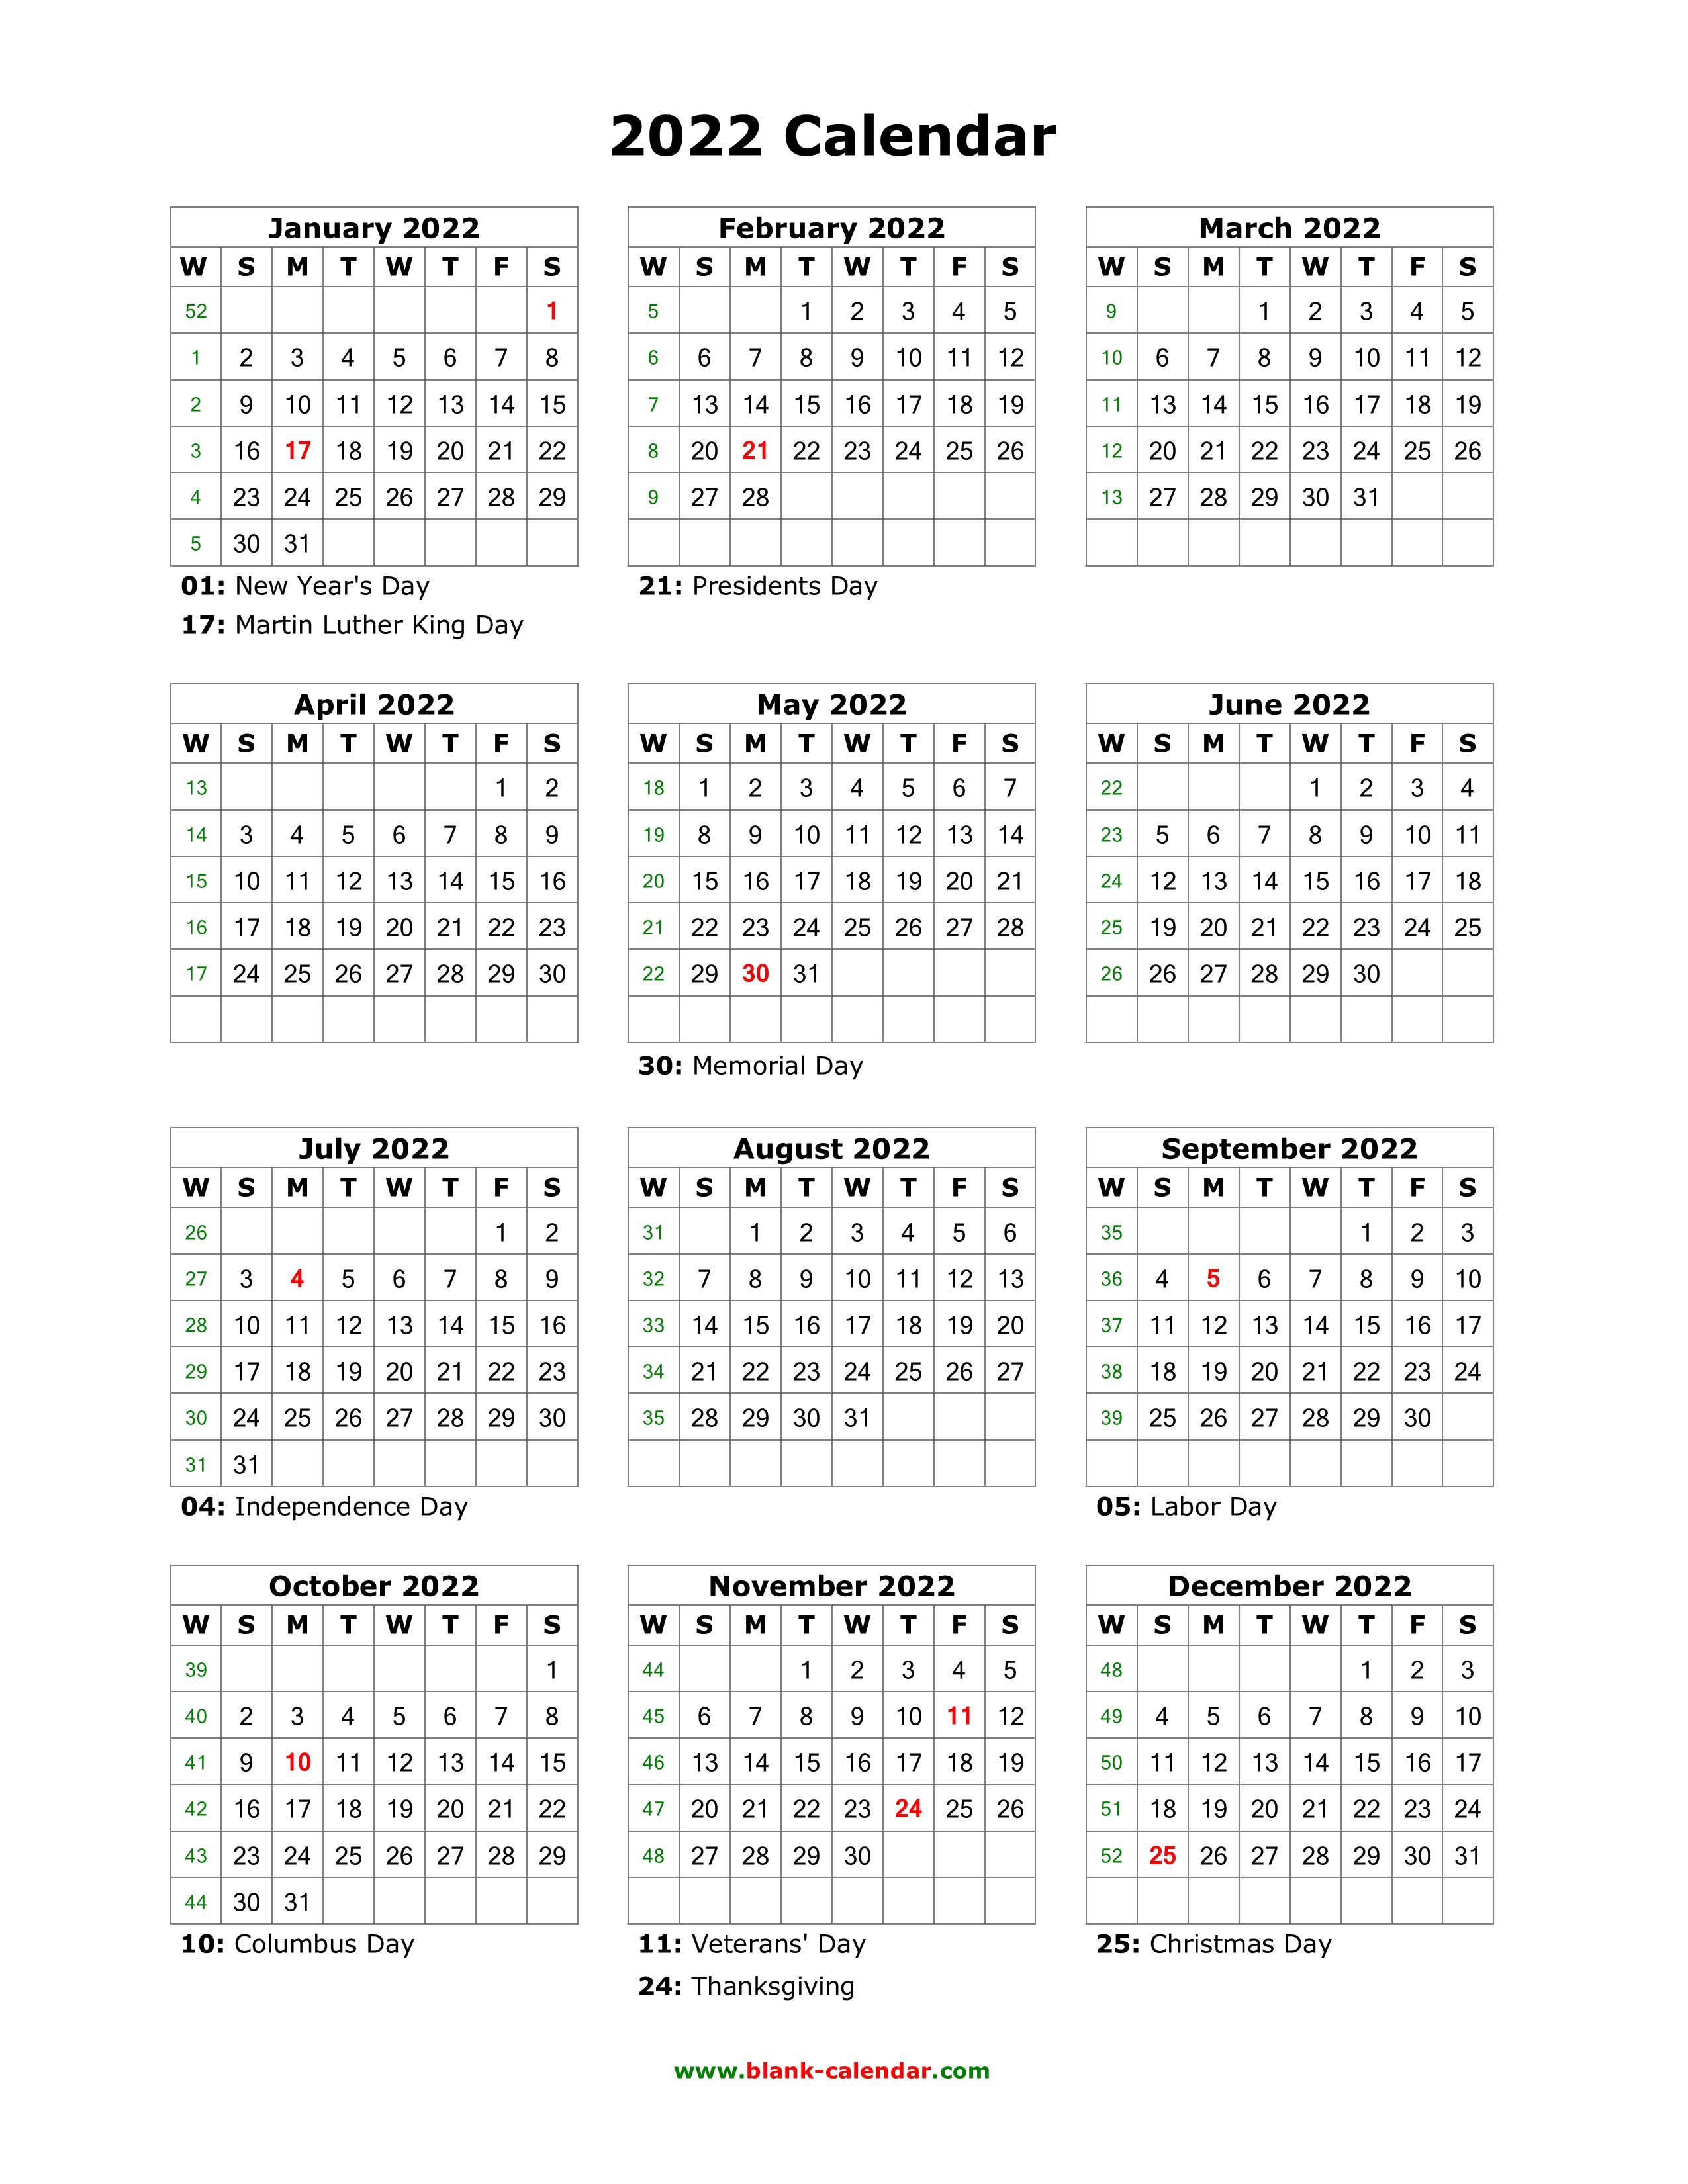 Download Blank Calendar 2022 With Us Holidays 12 Months On One Page Vertical